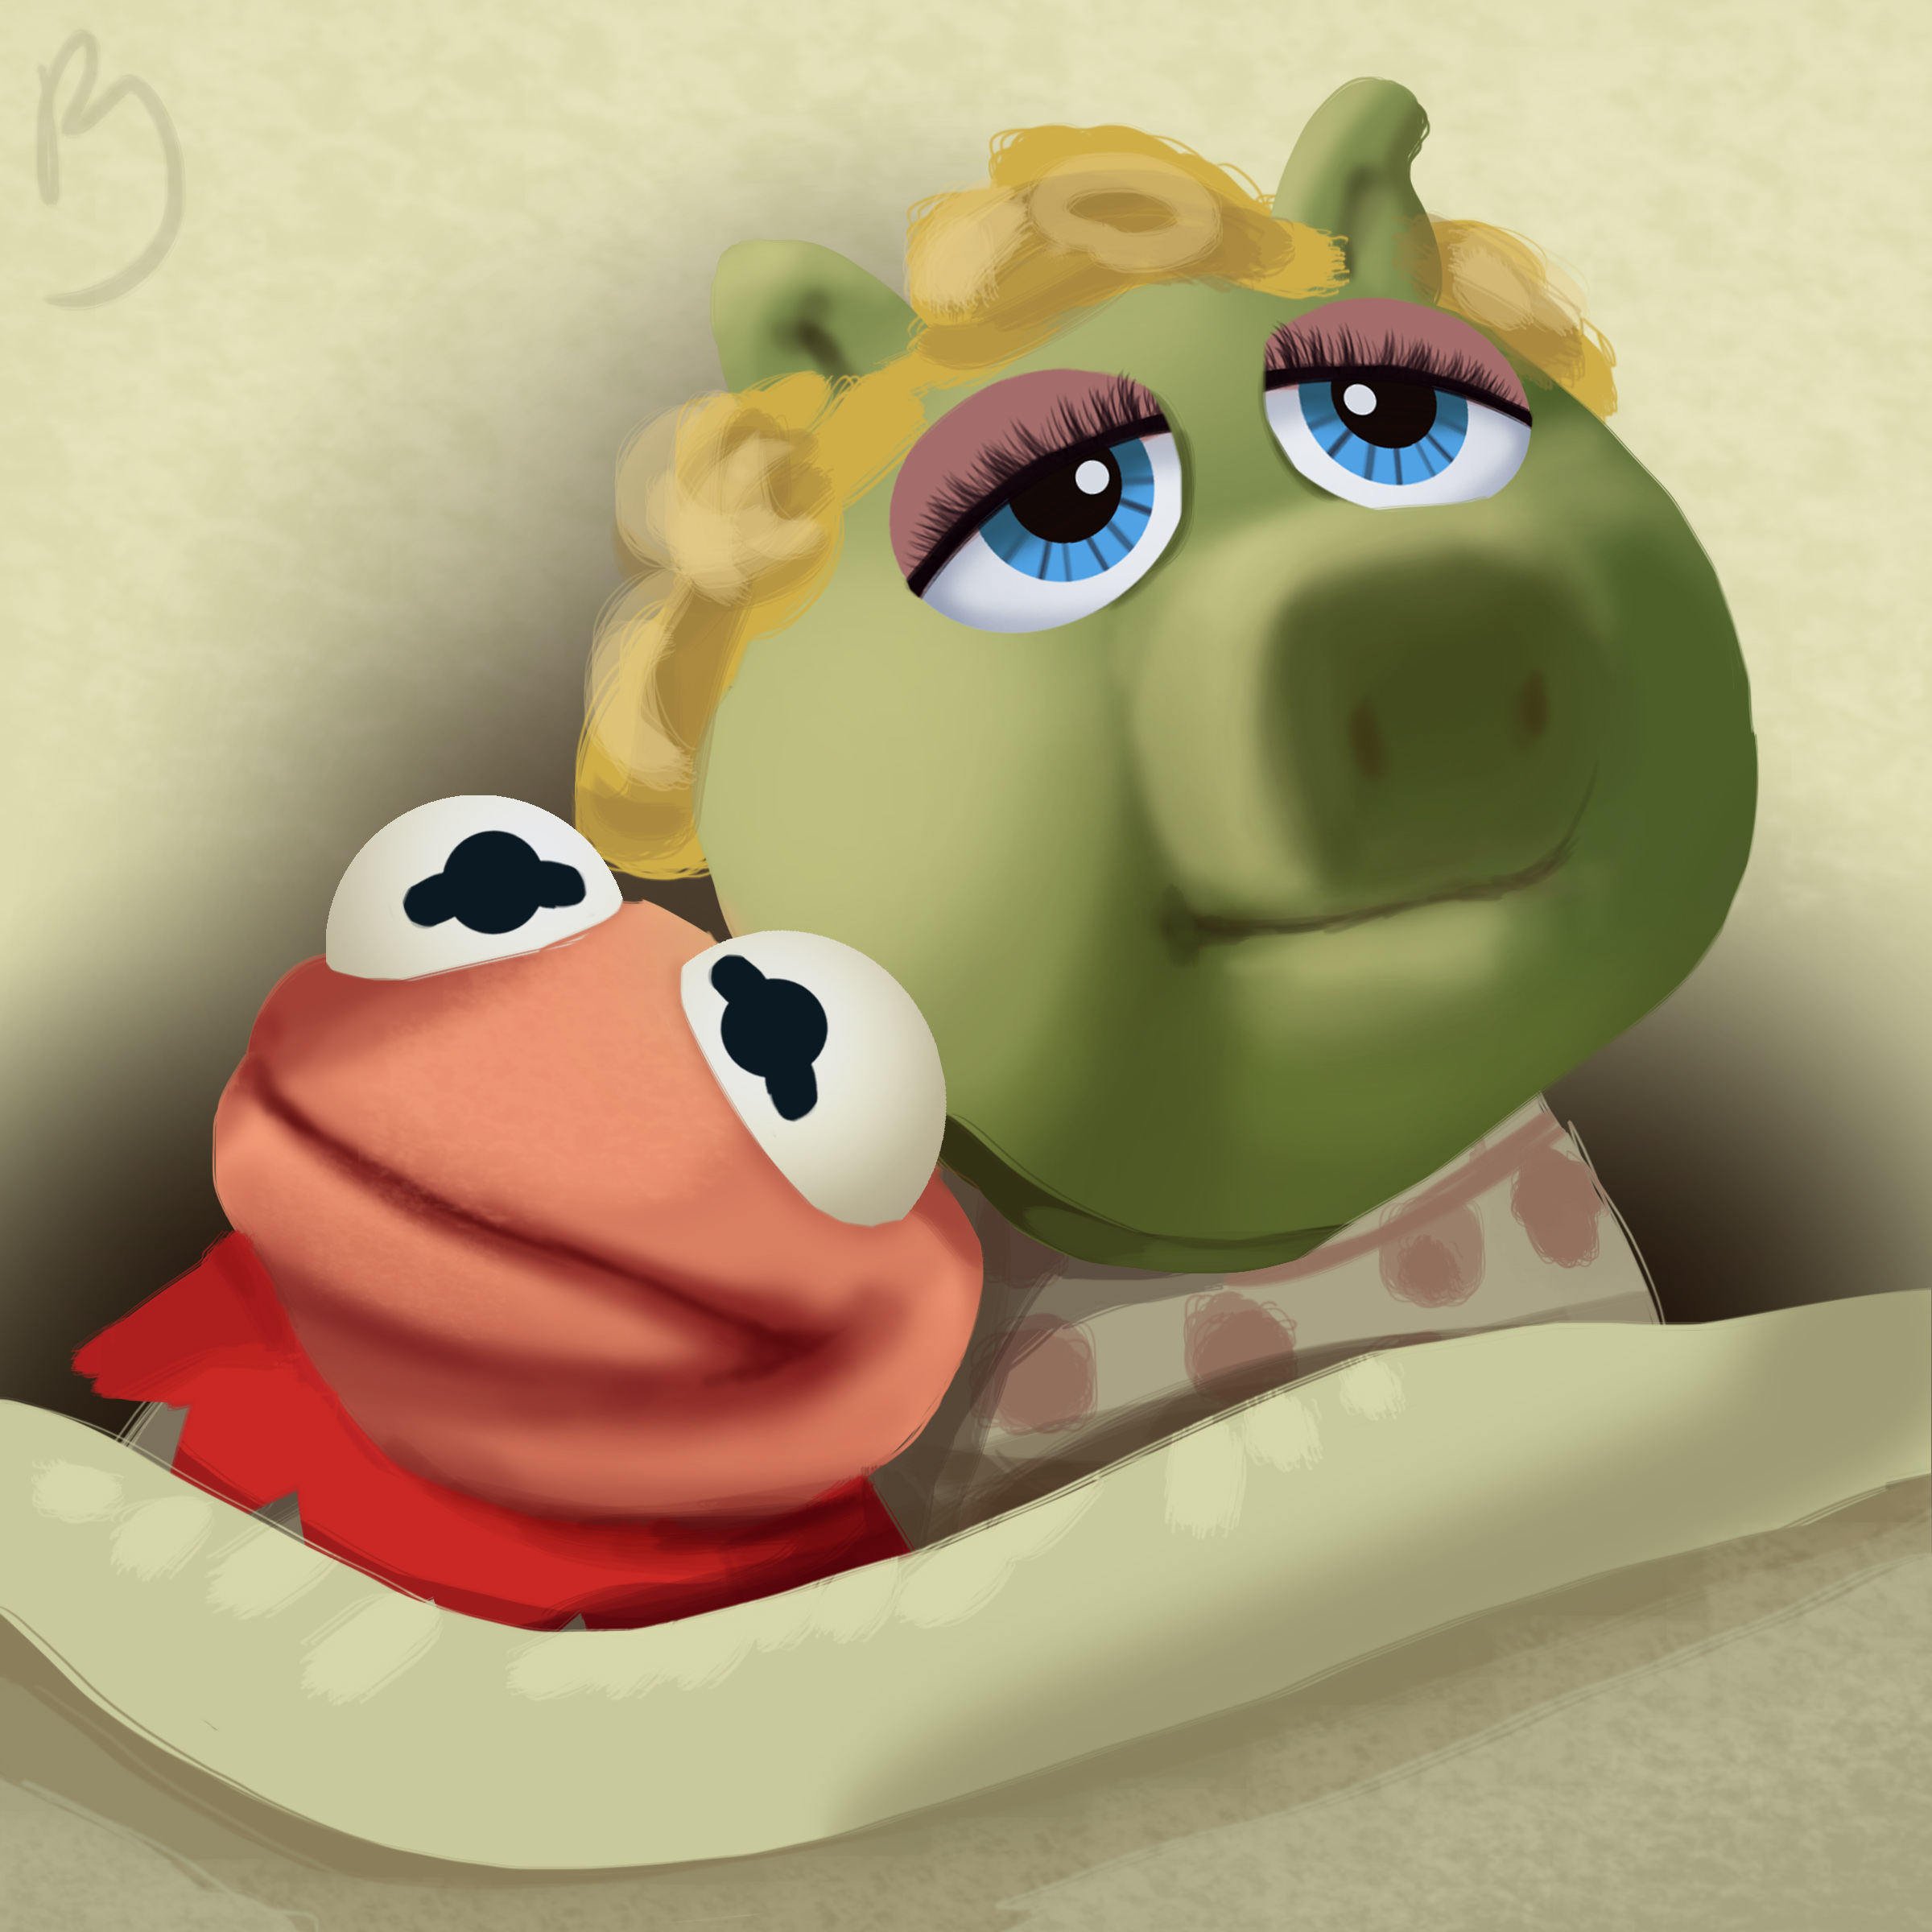 355 Kermit the Frog and Miss Piggy's offspring | 365 Random Muppets